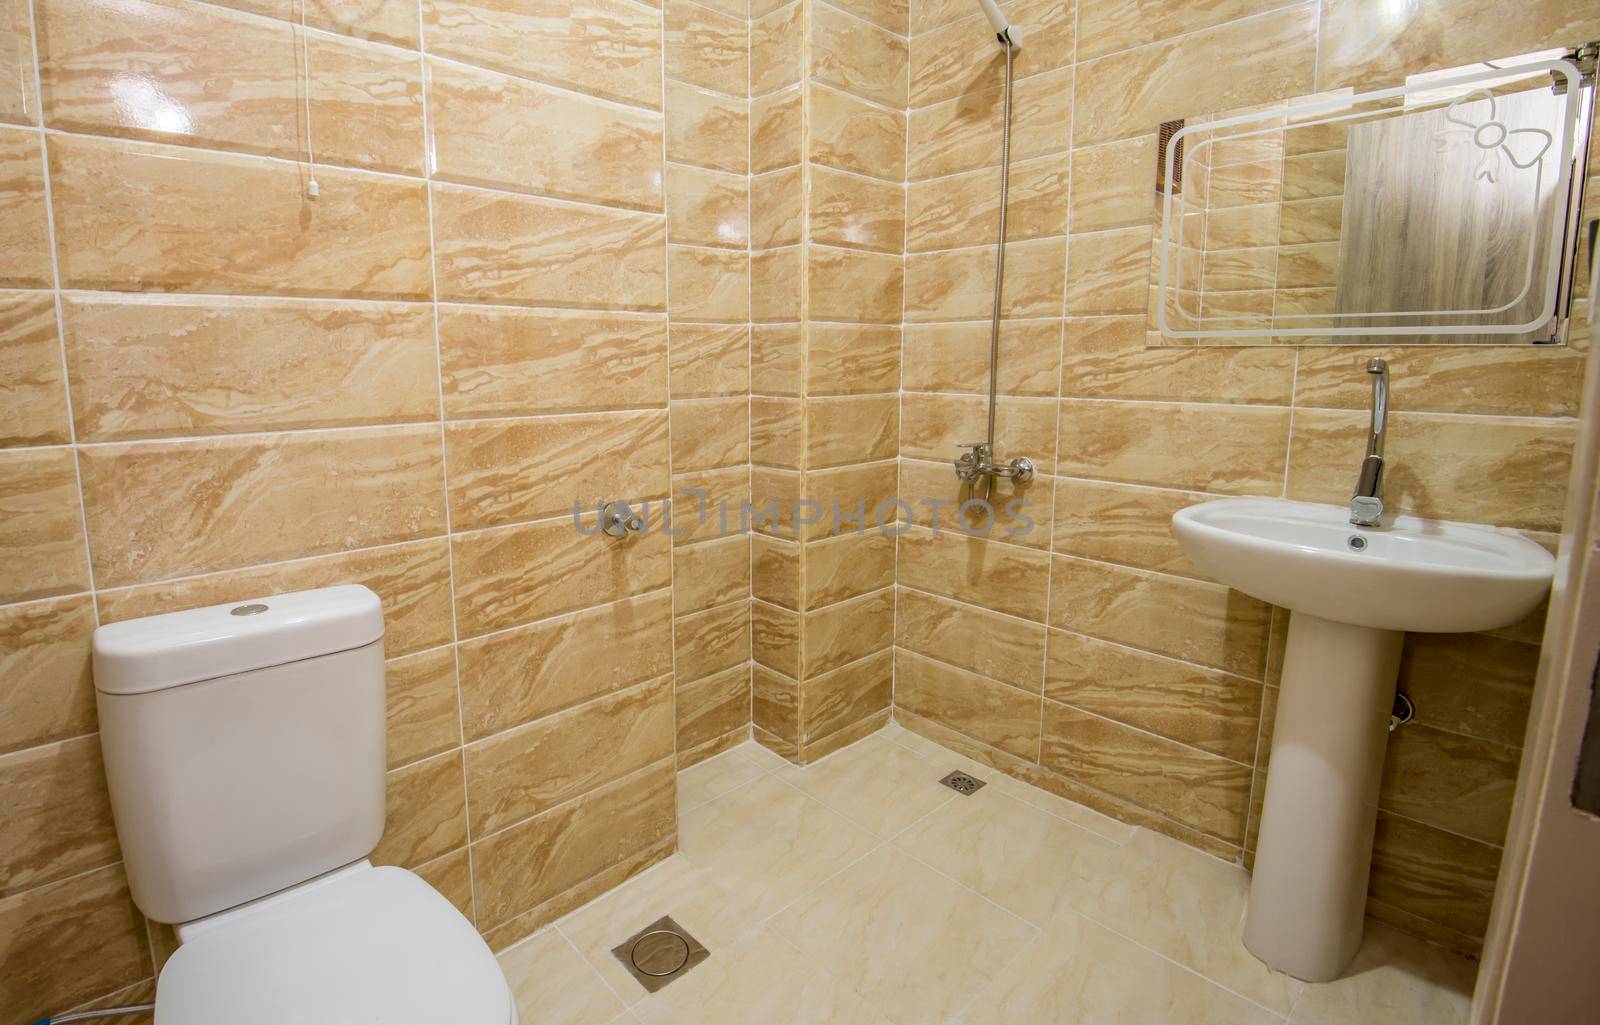 Interior design of a luxury show home bathroom with wet room shower and sink